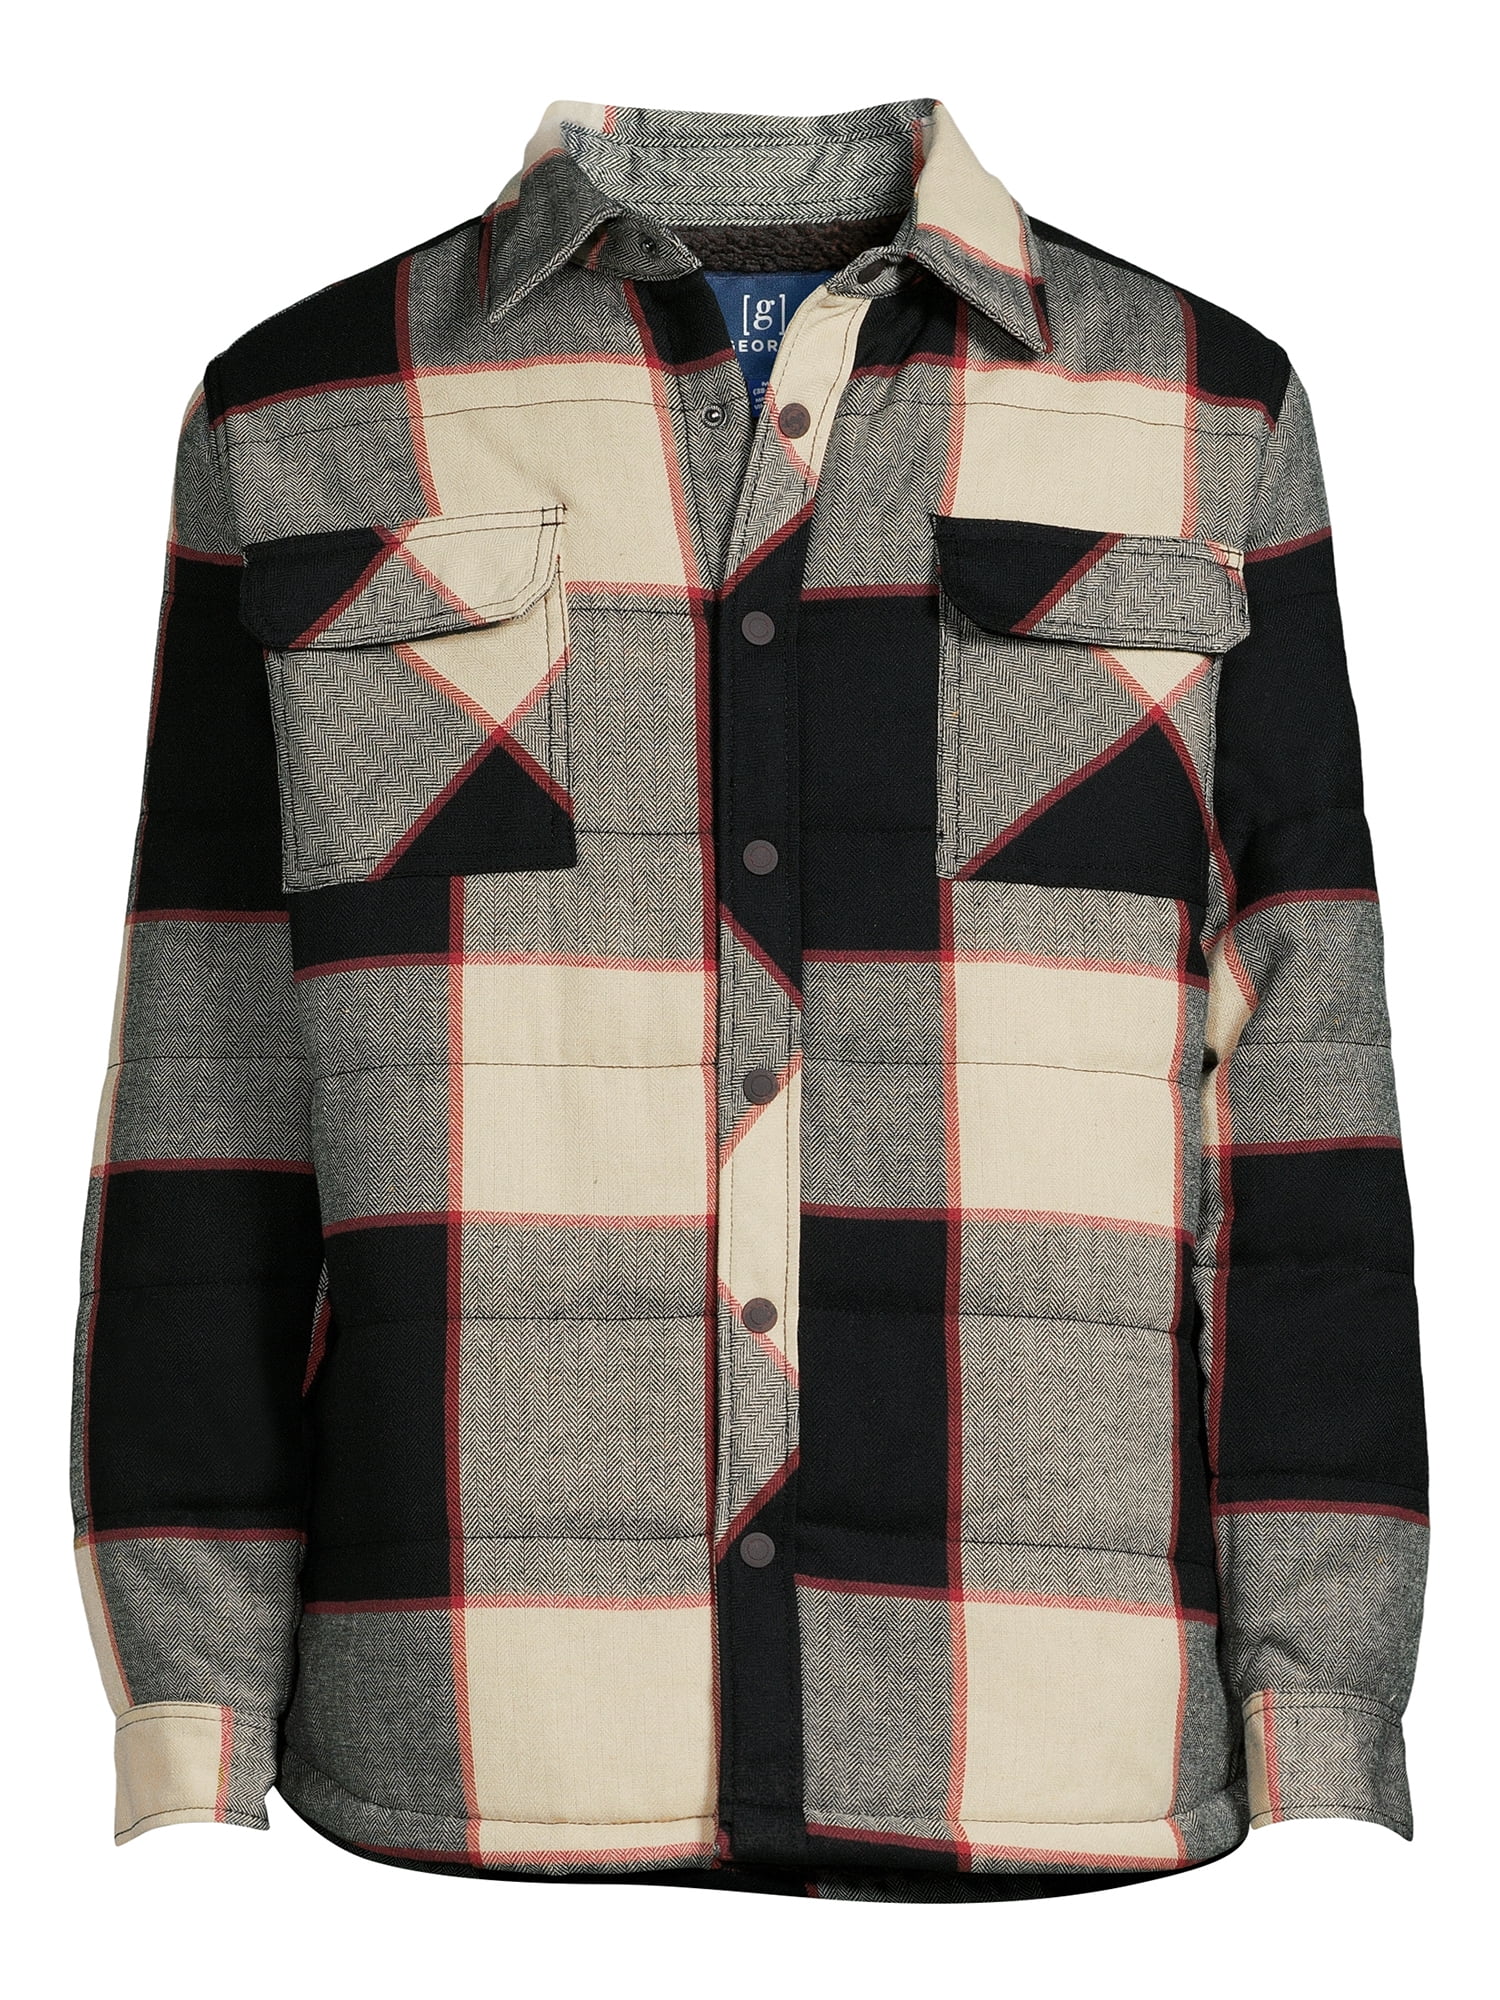 George Men's and Big Men's Shirt Jacket, Sizes up to 3XL 